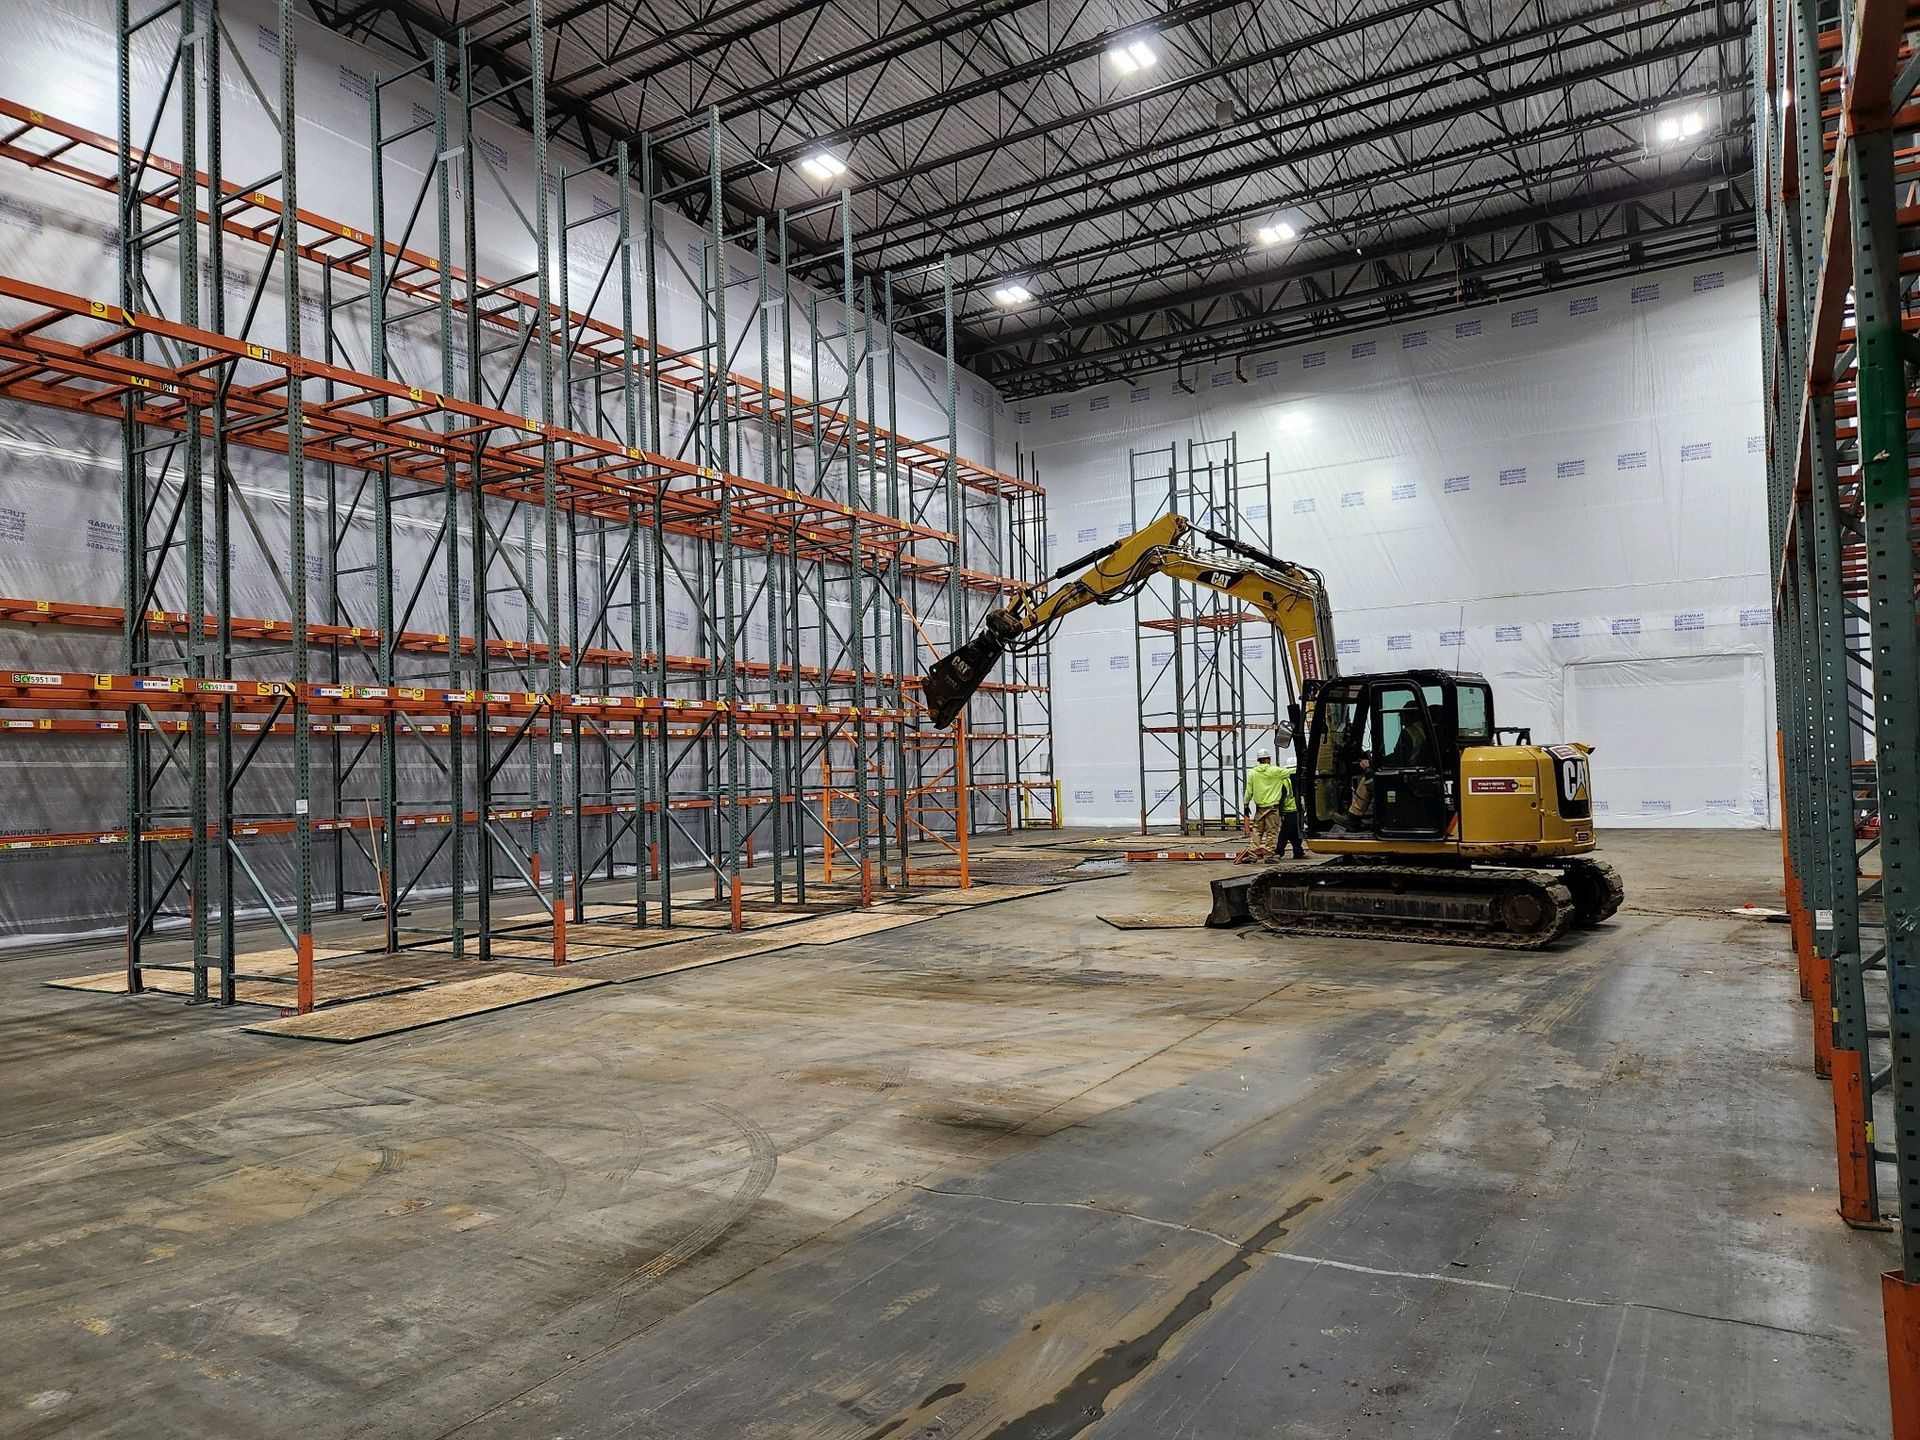 A yellow excavator is working in a large warehouse.